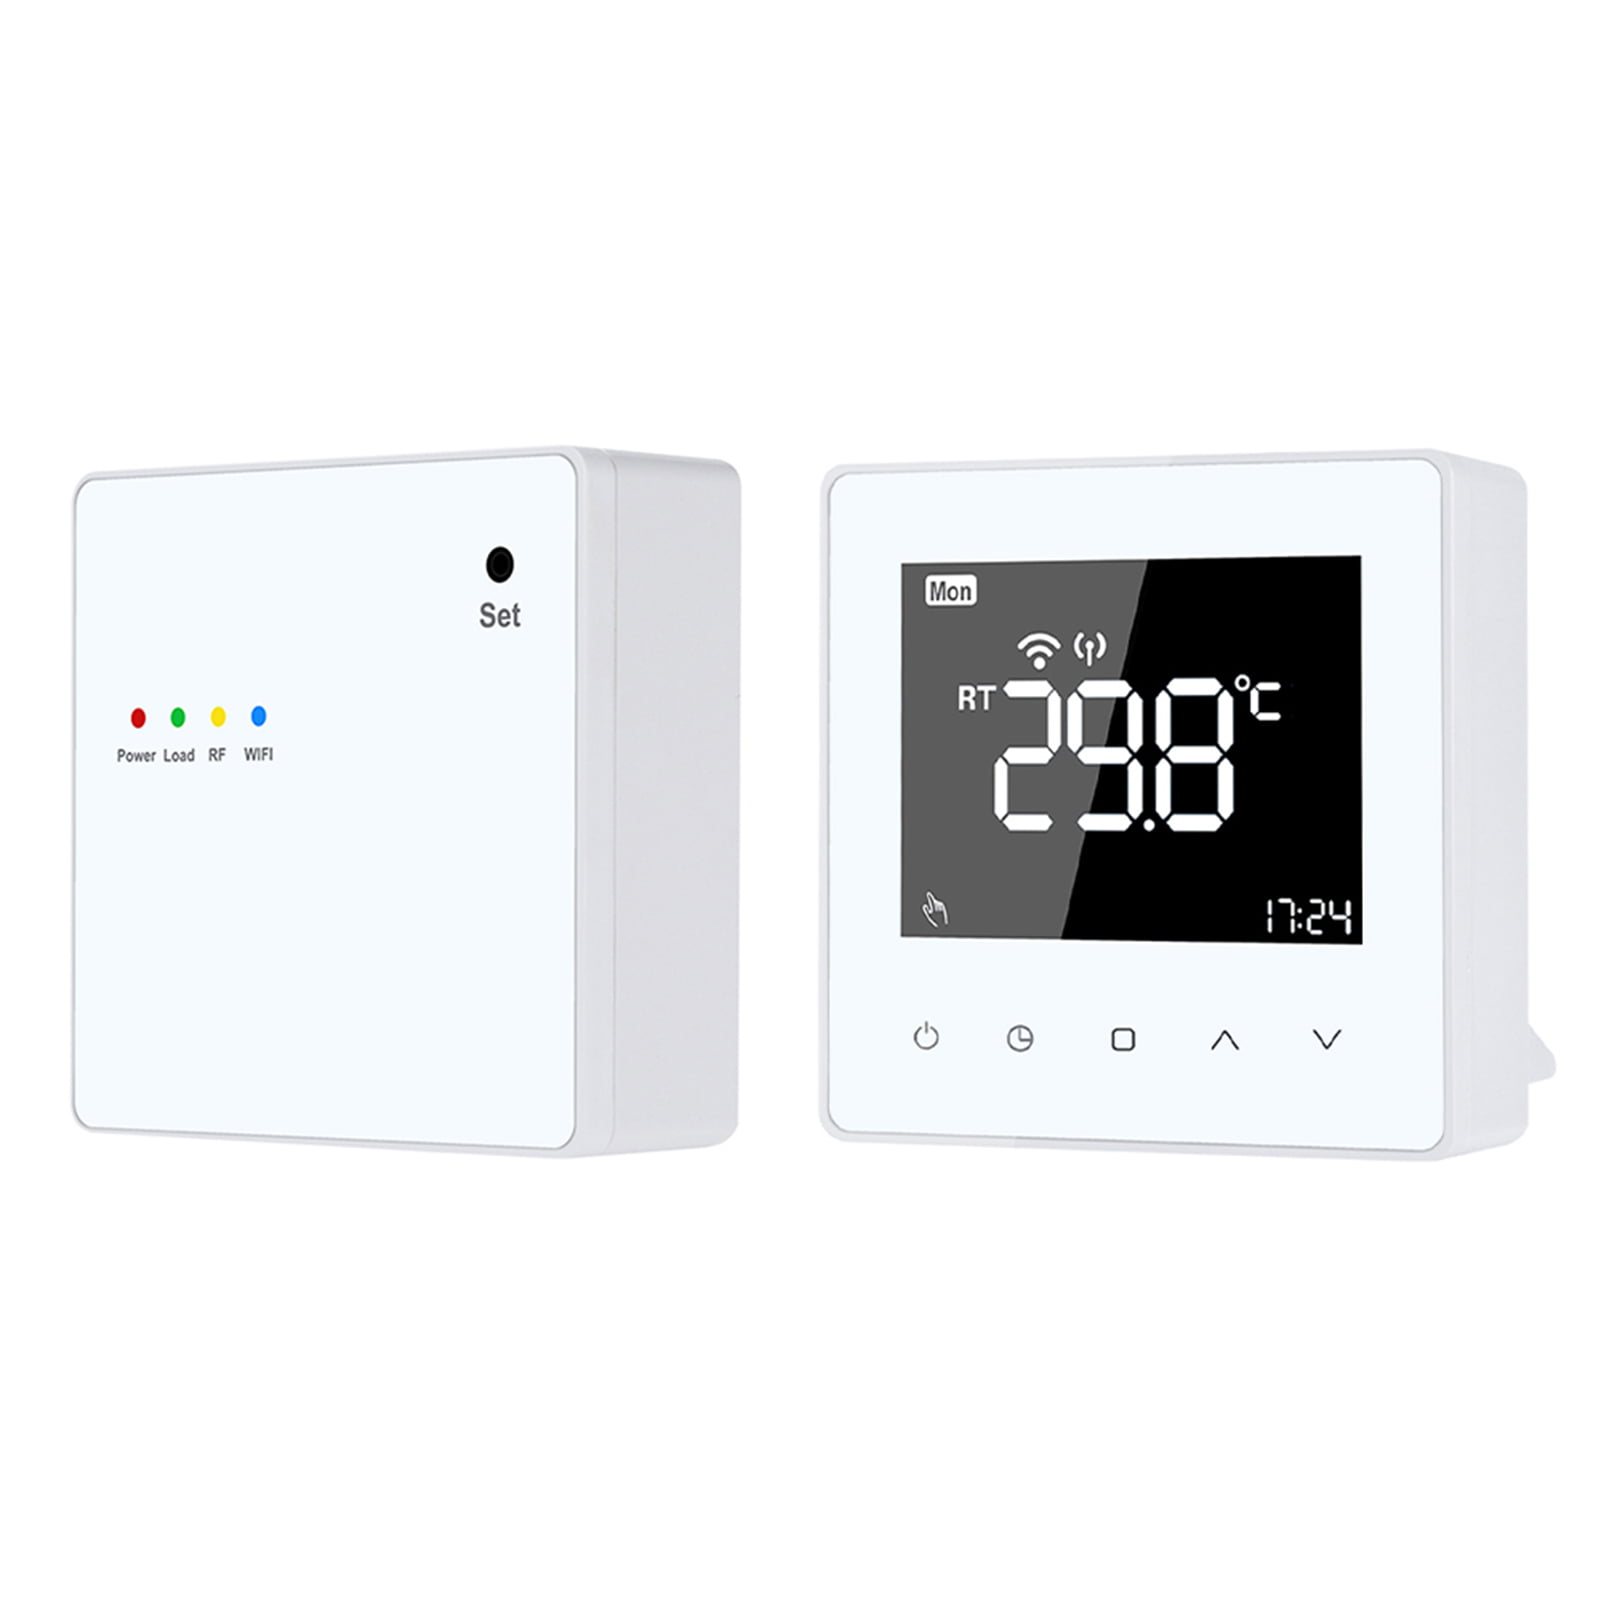 BESPORTBLE Digital Thermostat Smart 3A Programmable Touch Screen Control Wireless Heating Appliance for Indoor Office Heating Home 